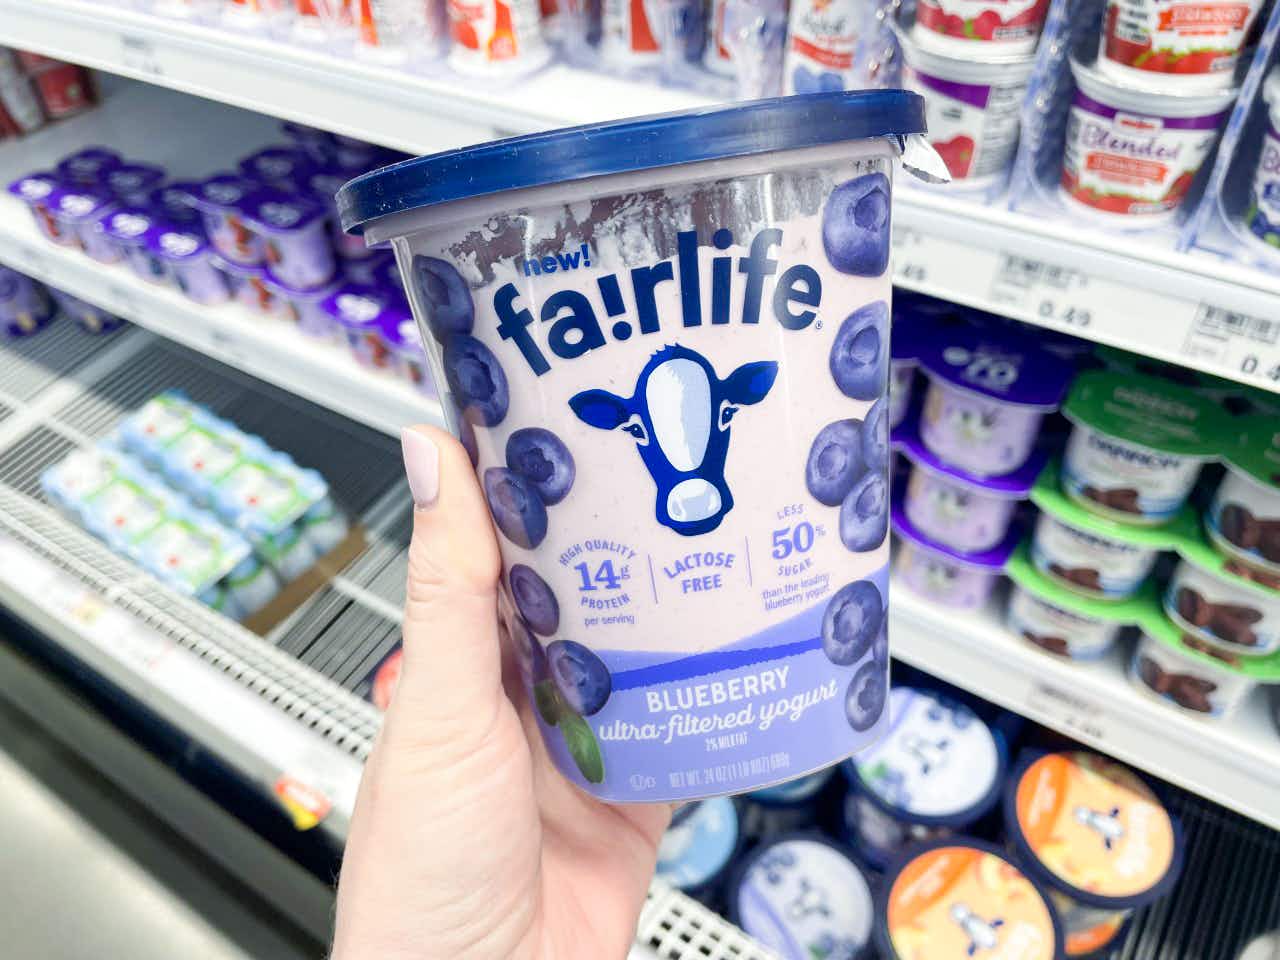 a person holding up fairlife yogurt